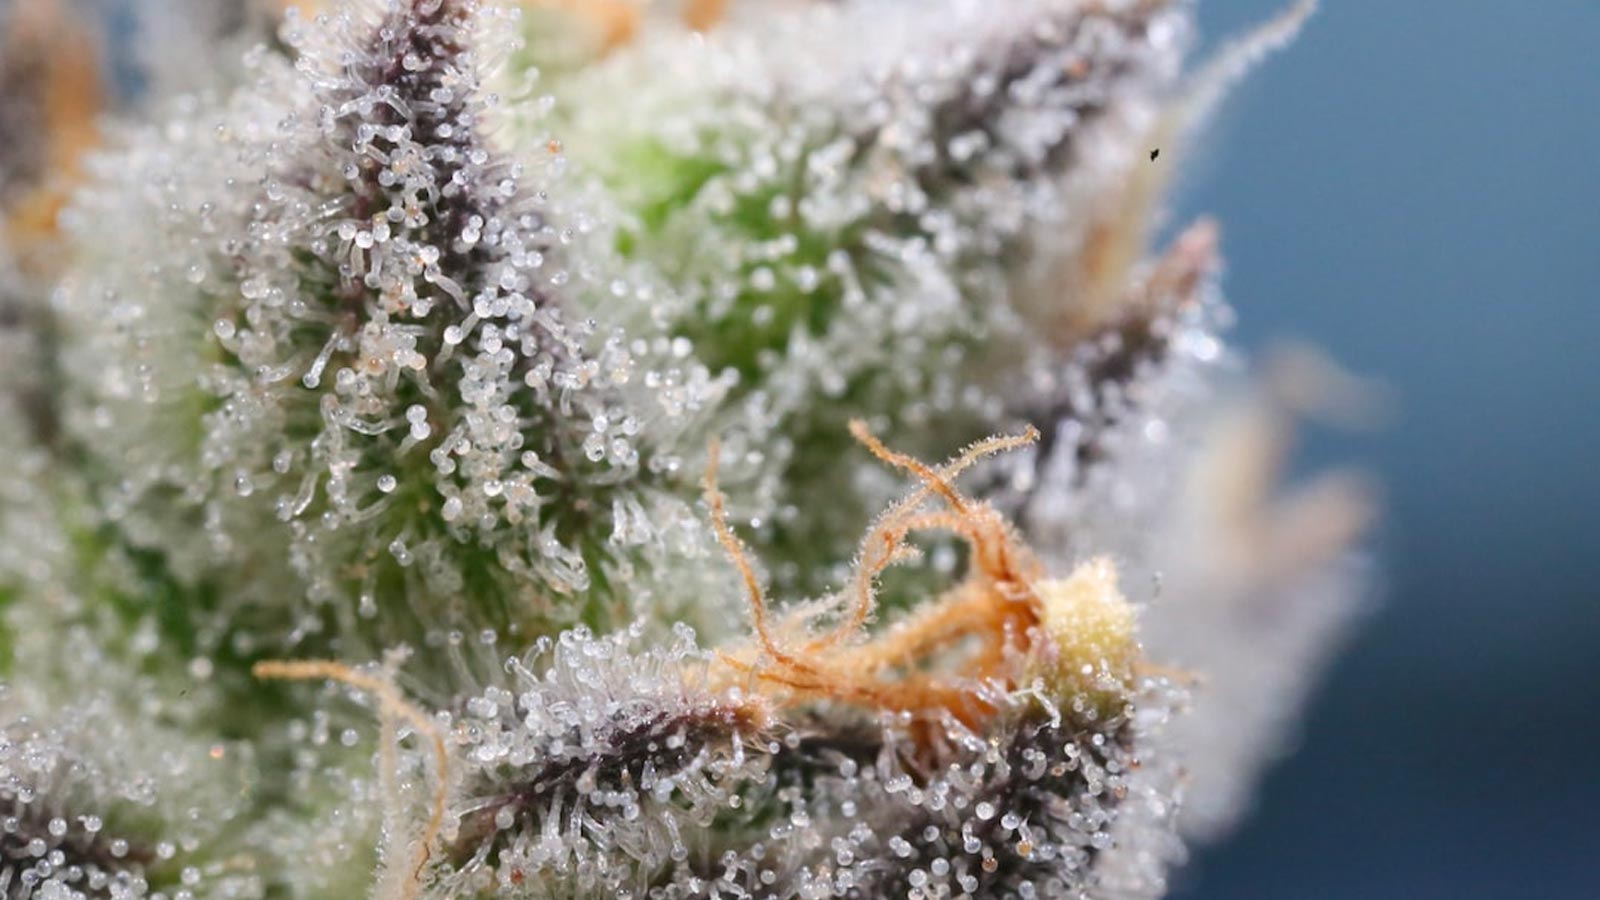 Close-up of cannabis trichomes - Tiny, crystal-like structures on the surface of cannabis plants that contain high concentrations of cannabinoids and terpenes. This image shows the intricate details of the trichomes, which are responsible for producing the potent effects of cannabis.